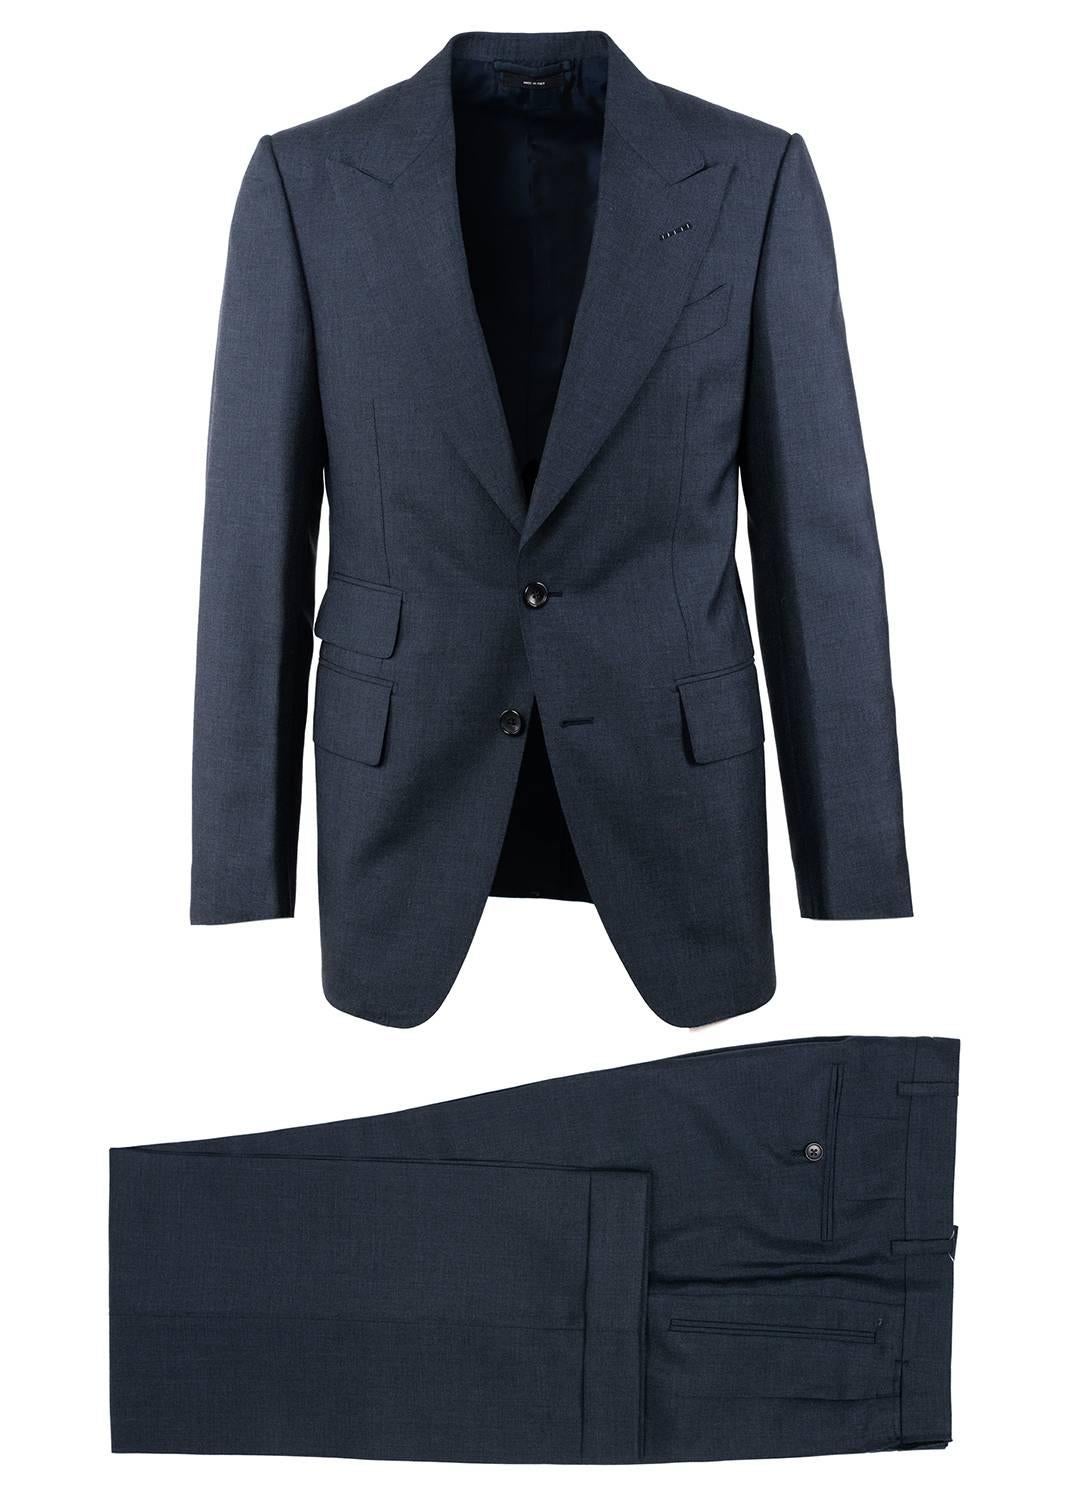 Specially crafted for the modern man Tom Ford introduces a updated signature two piece silhouette. Finished with pure mohair that provides a slight grey heather touch this suit included pleated front trousers, a peak lapel jacket, and signature Tom